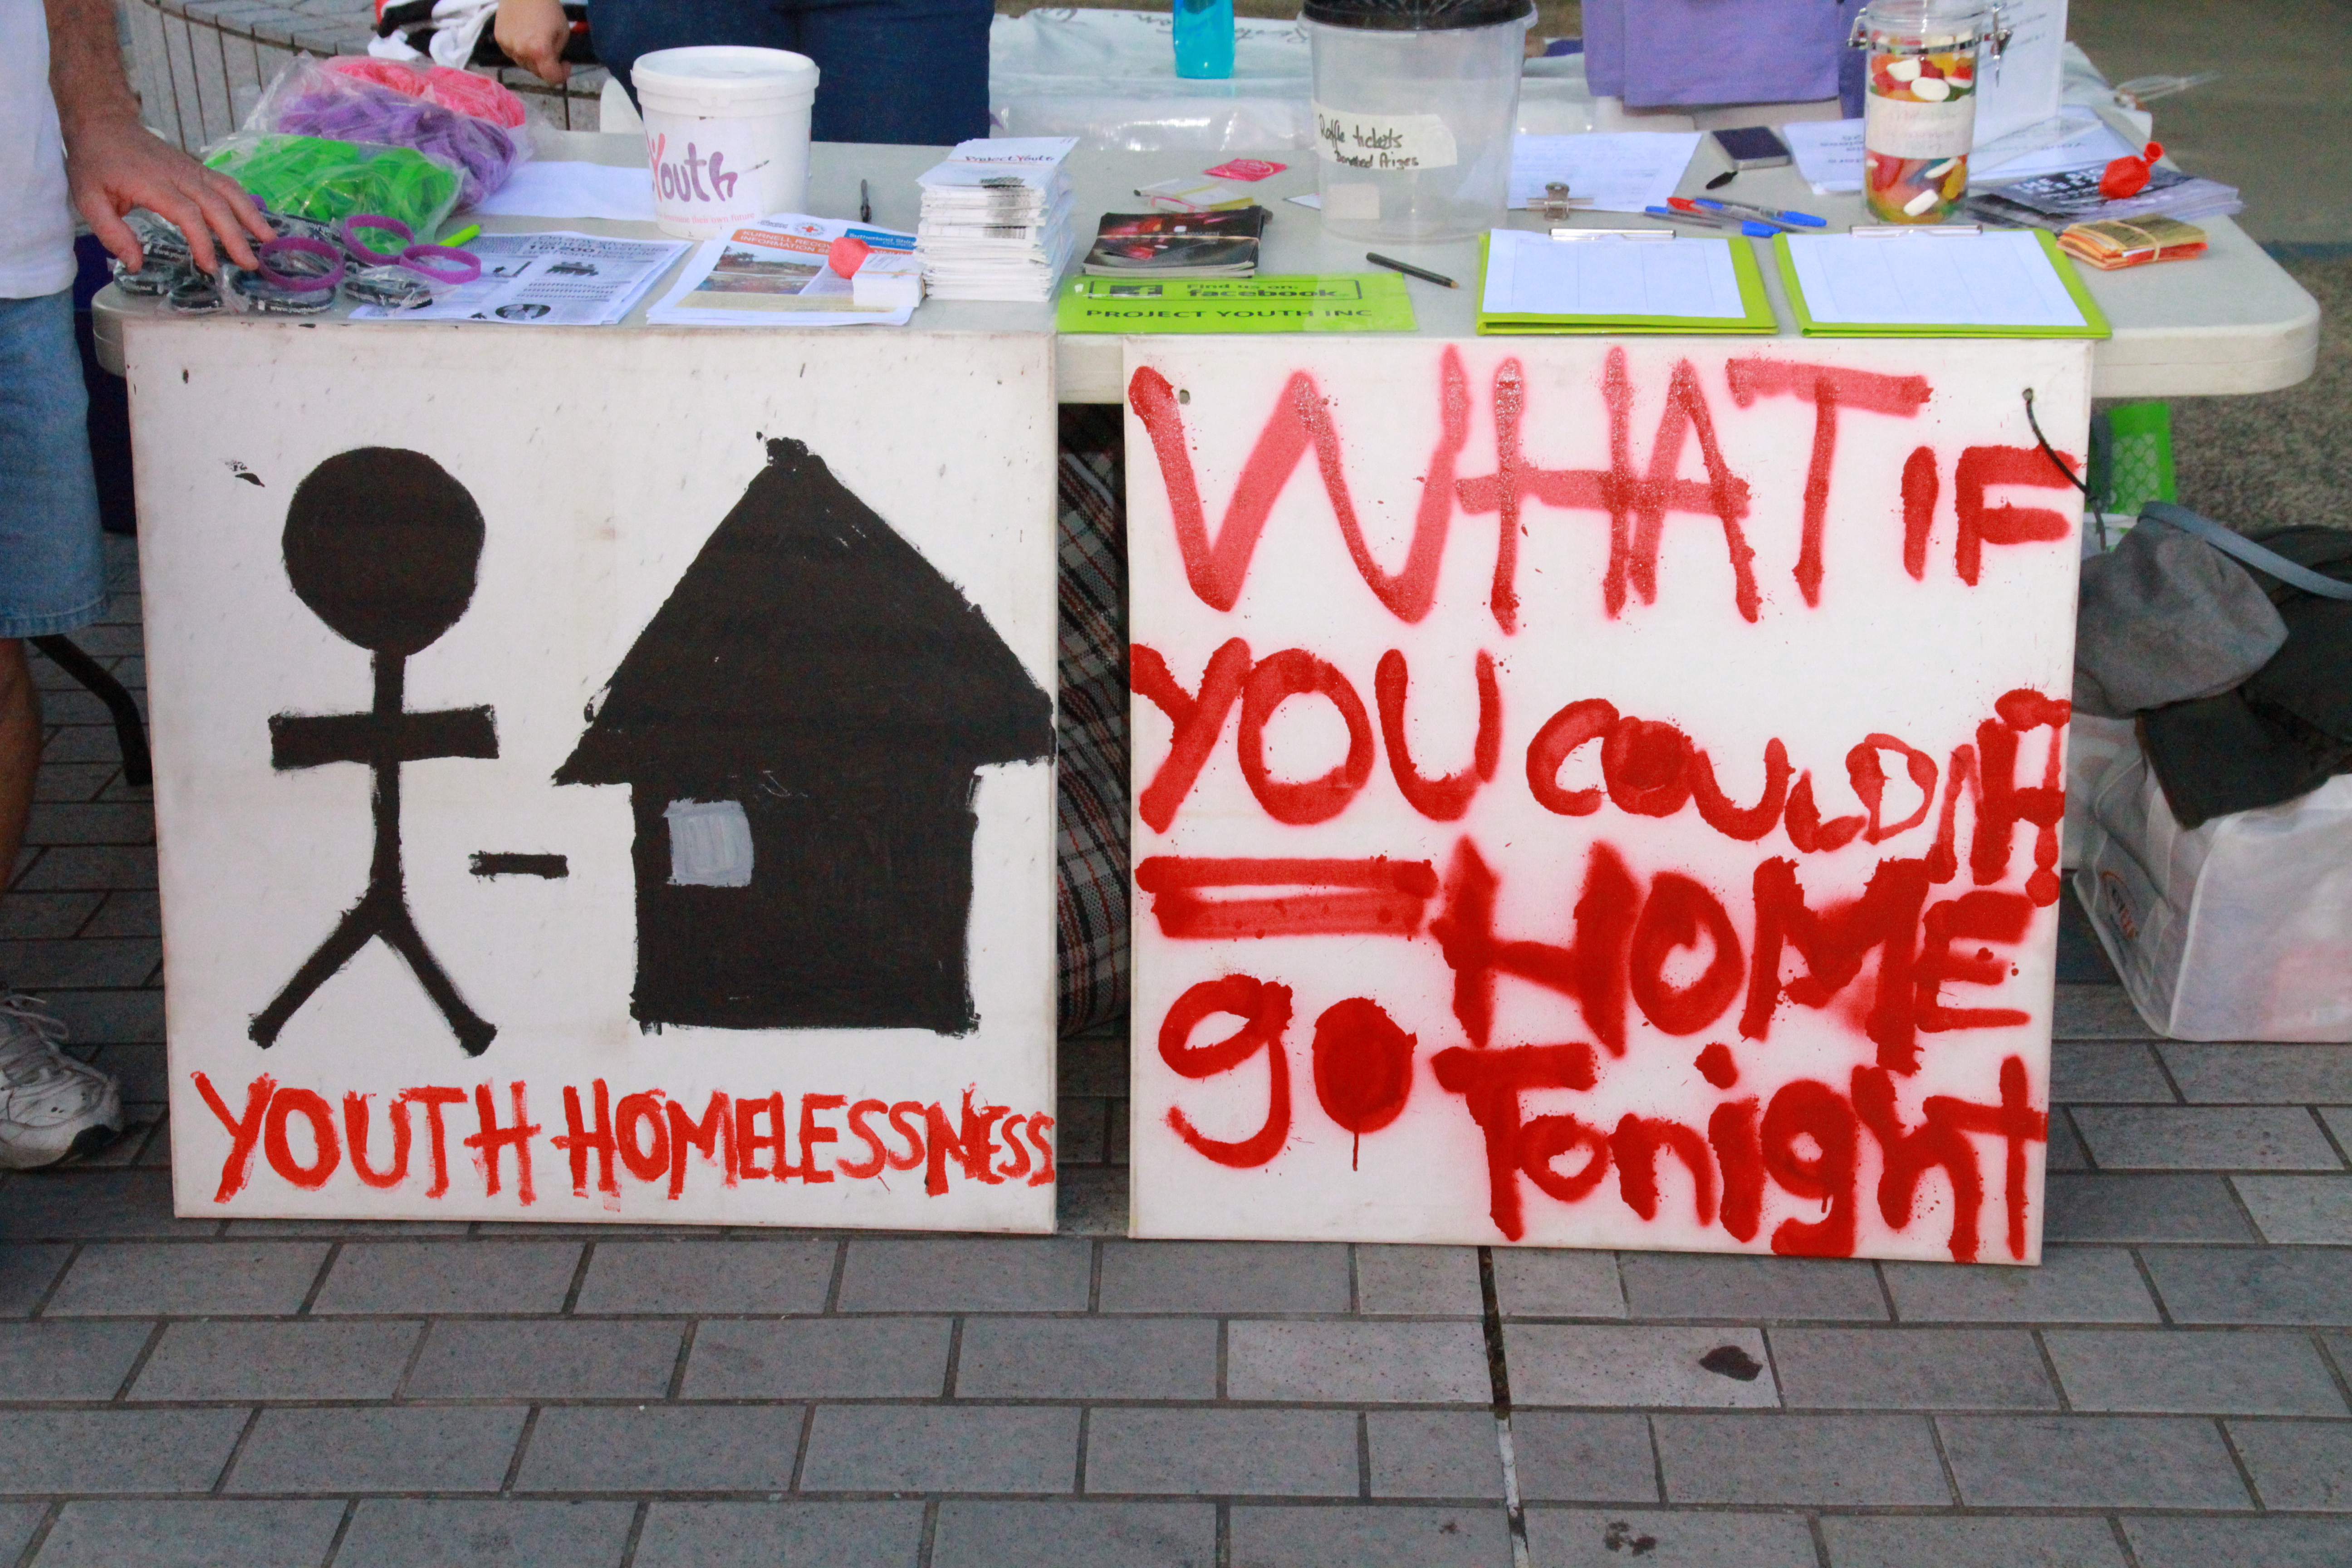 Youth homelessness